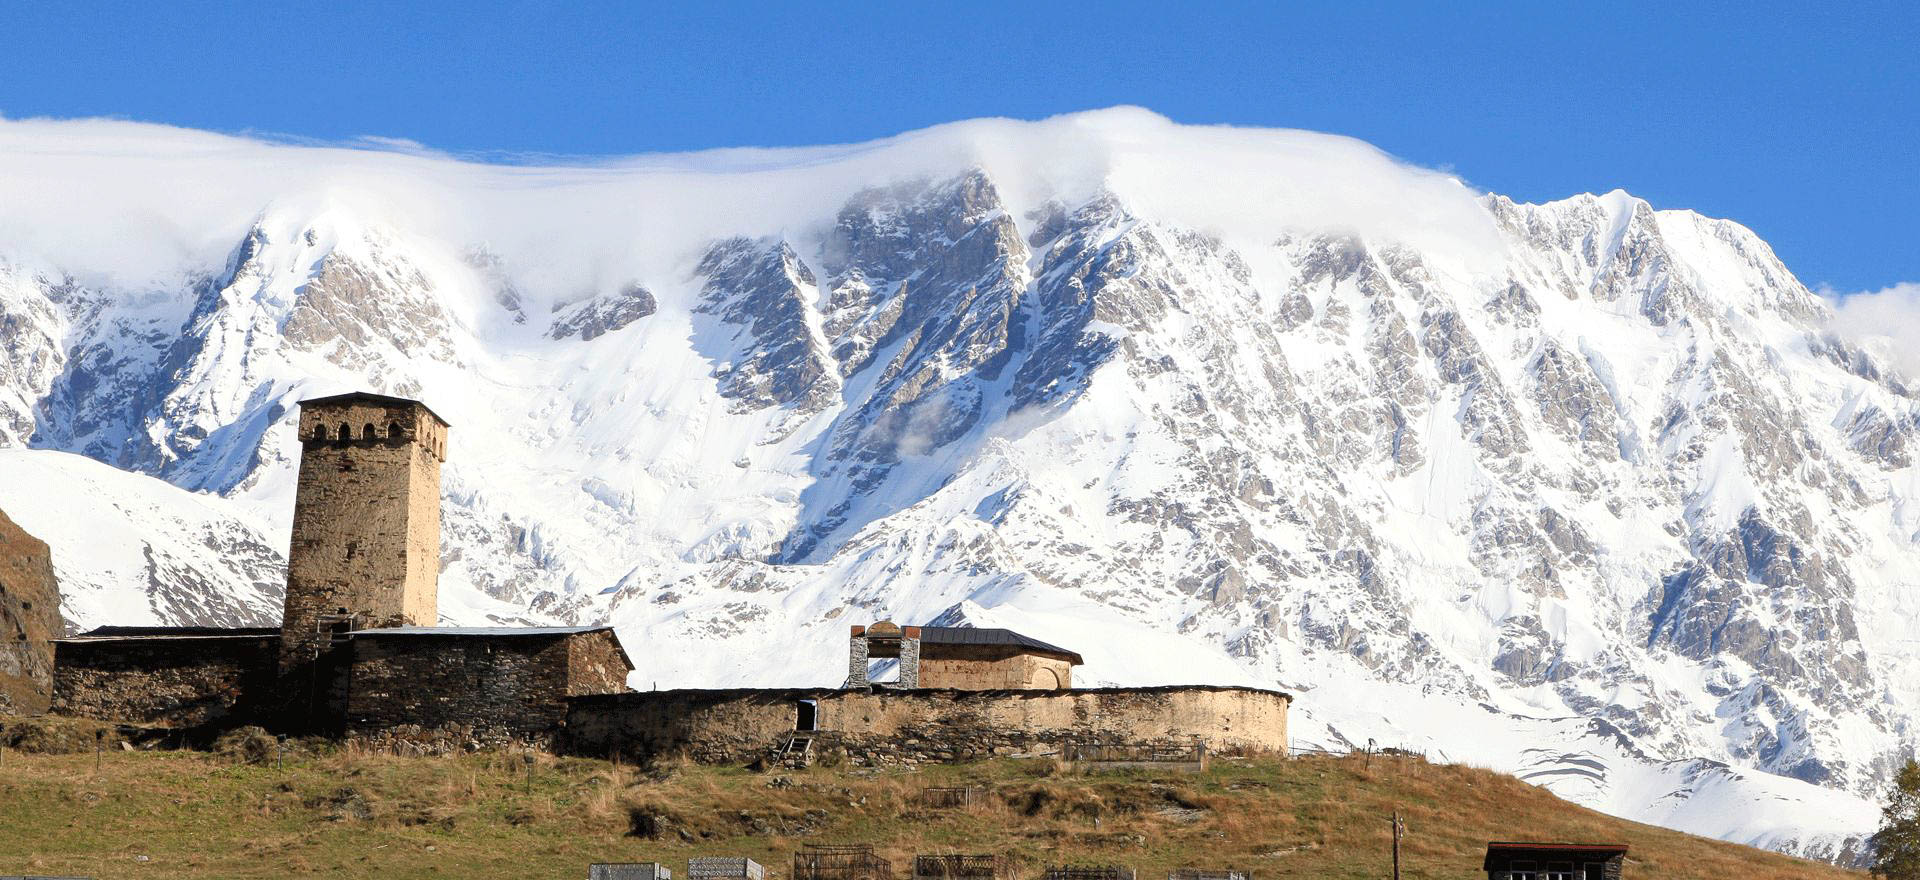 Village and watchtower in Svaneti - Georgia Holidays and Tours